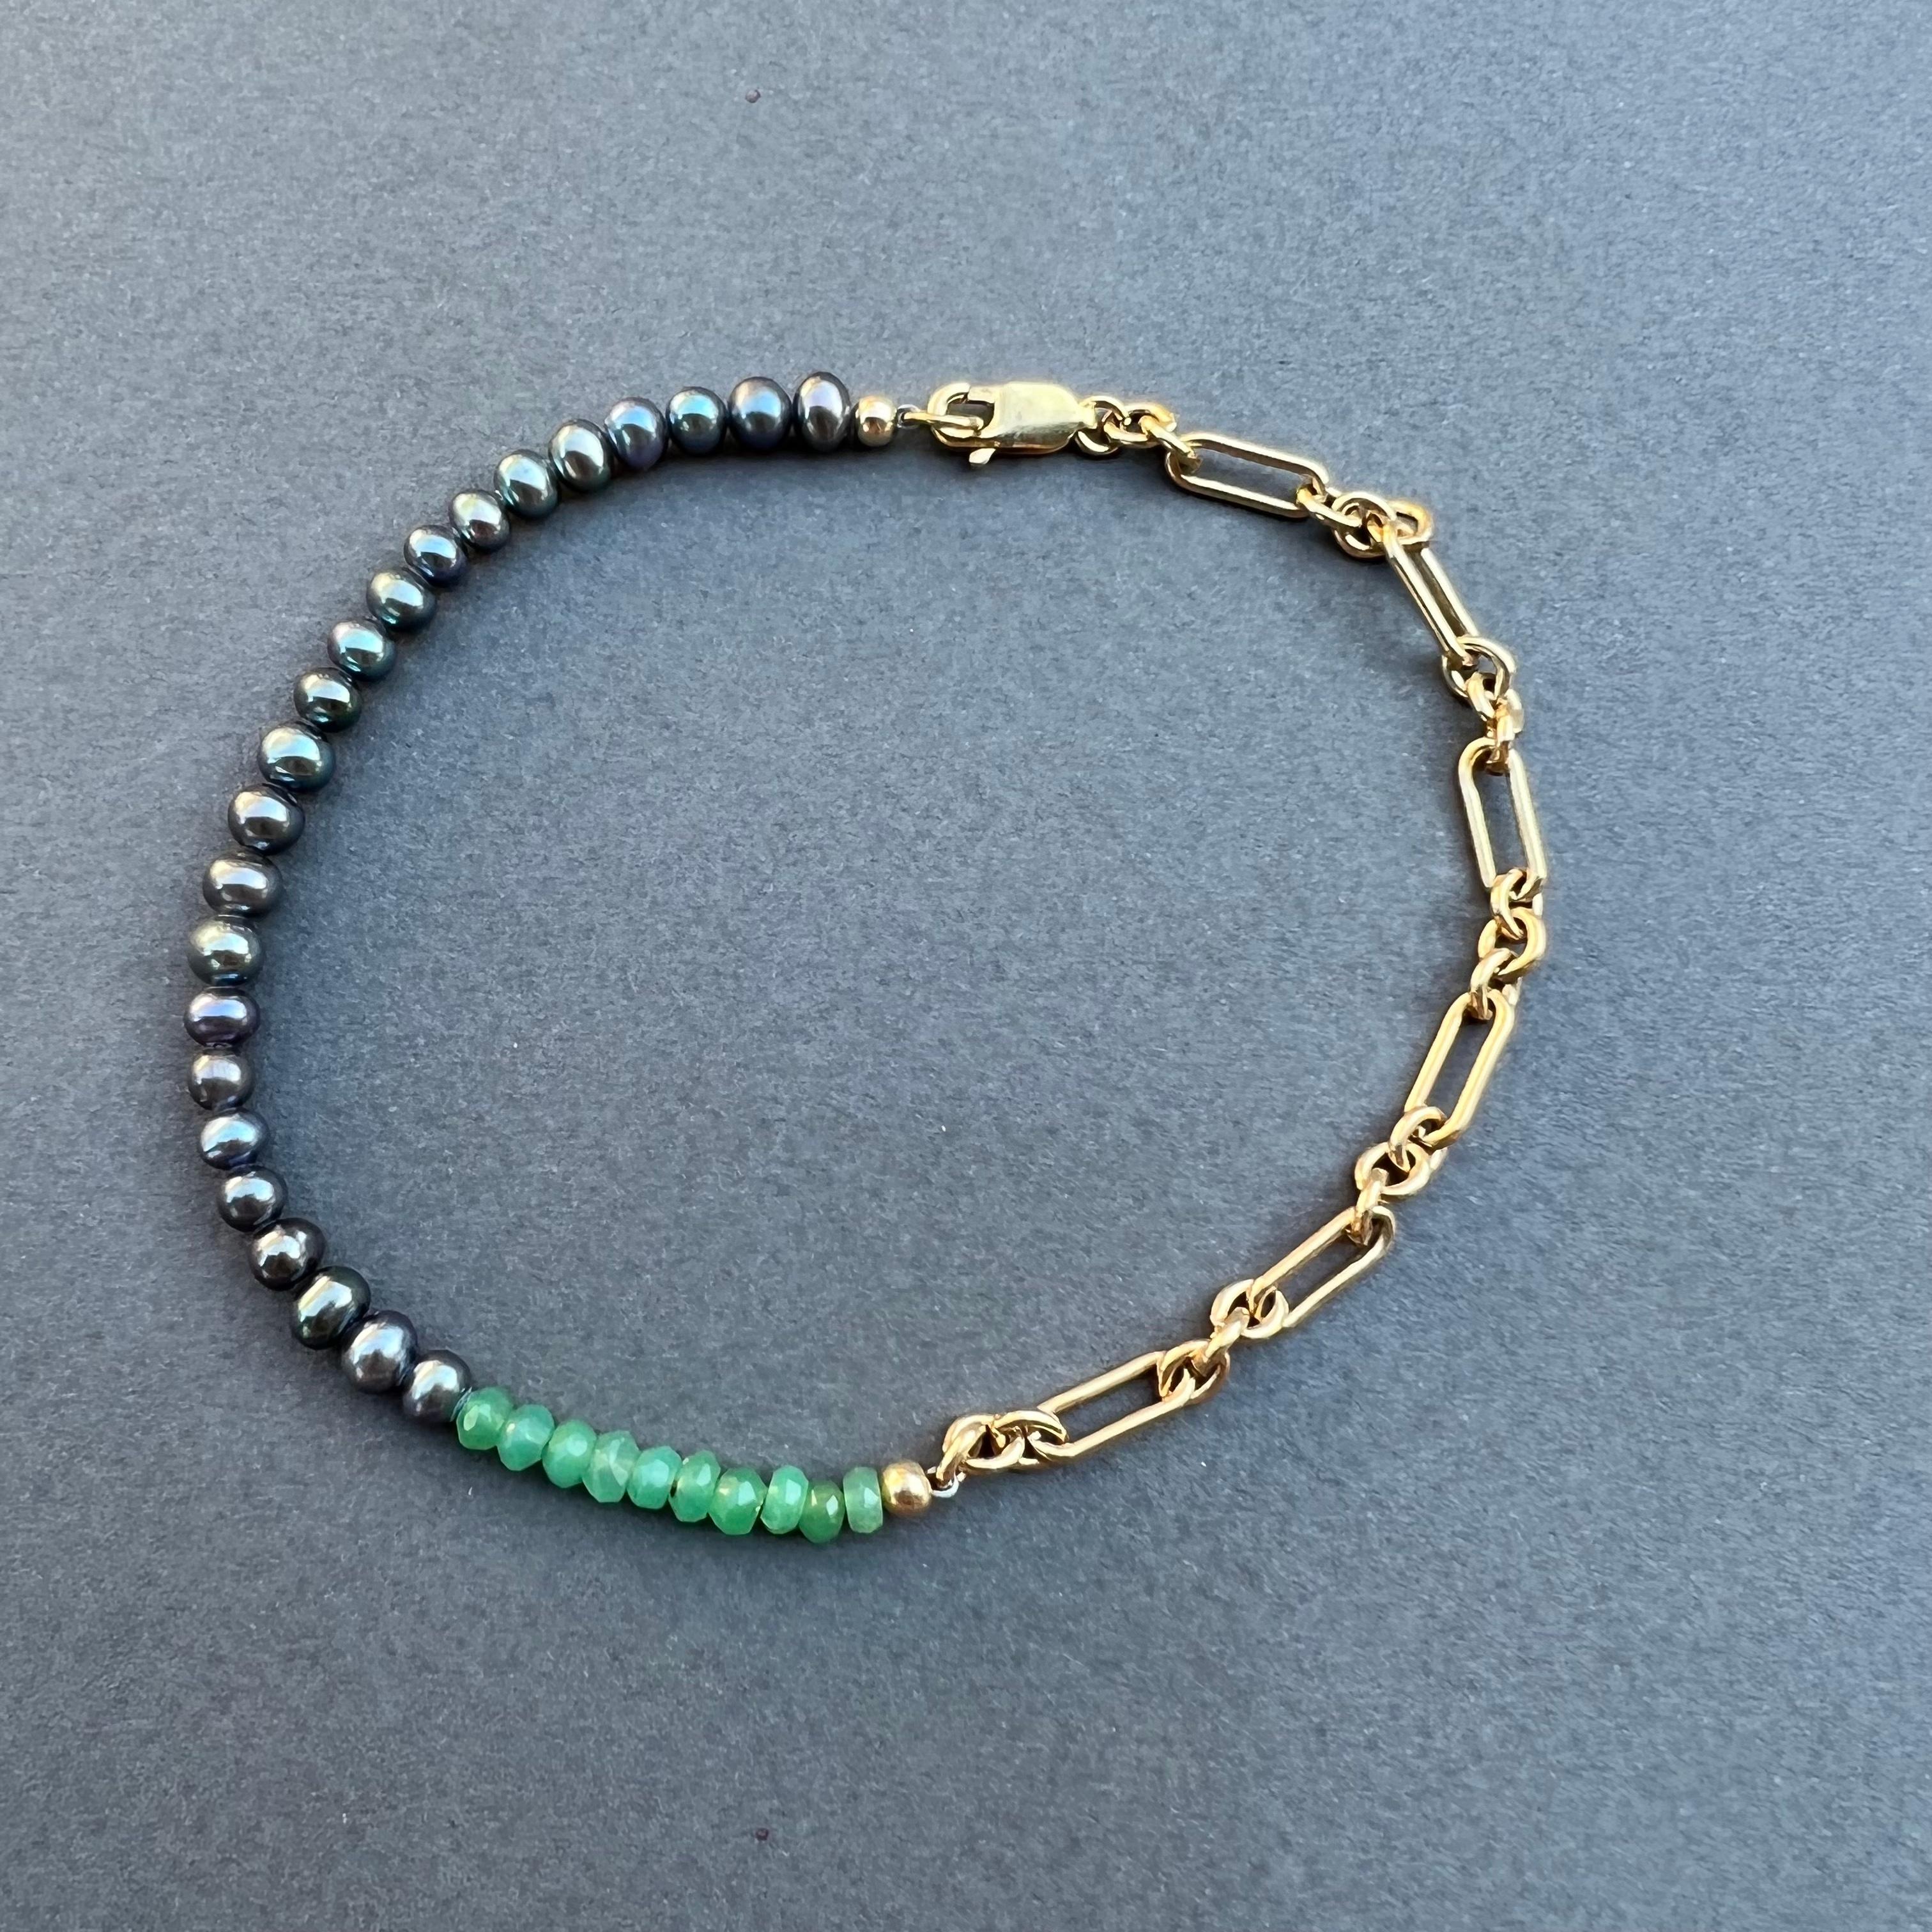 Round Cut Black Pearl Ankle Bracelet Gold Filled Chain Chrysoprase J Dauphin For Sale